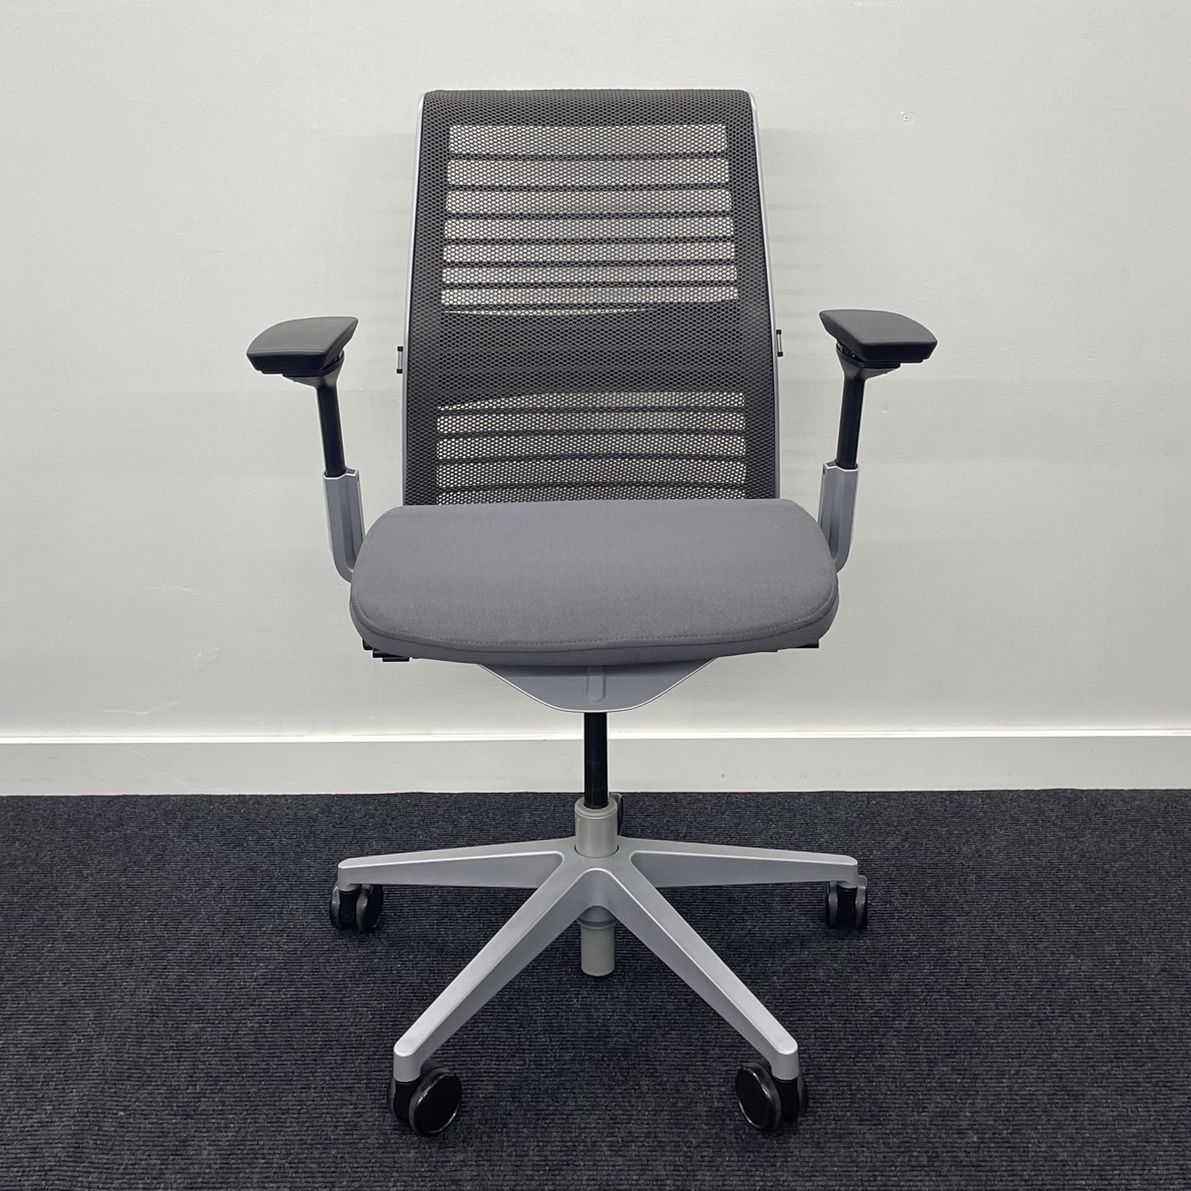 VERY LIKE NEW STEELCASE THINK V2 CHAIRS FULLY LOADED WITH LUMBAR SUPPORT!